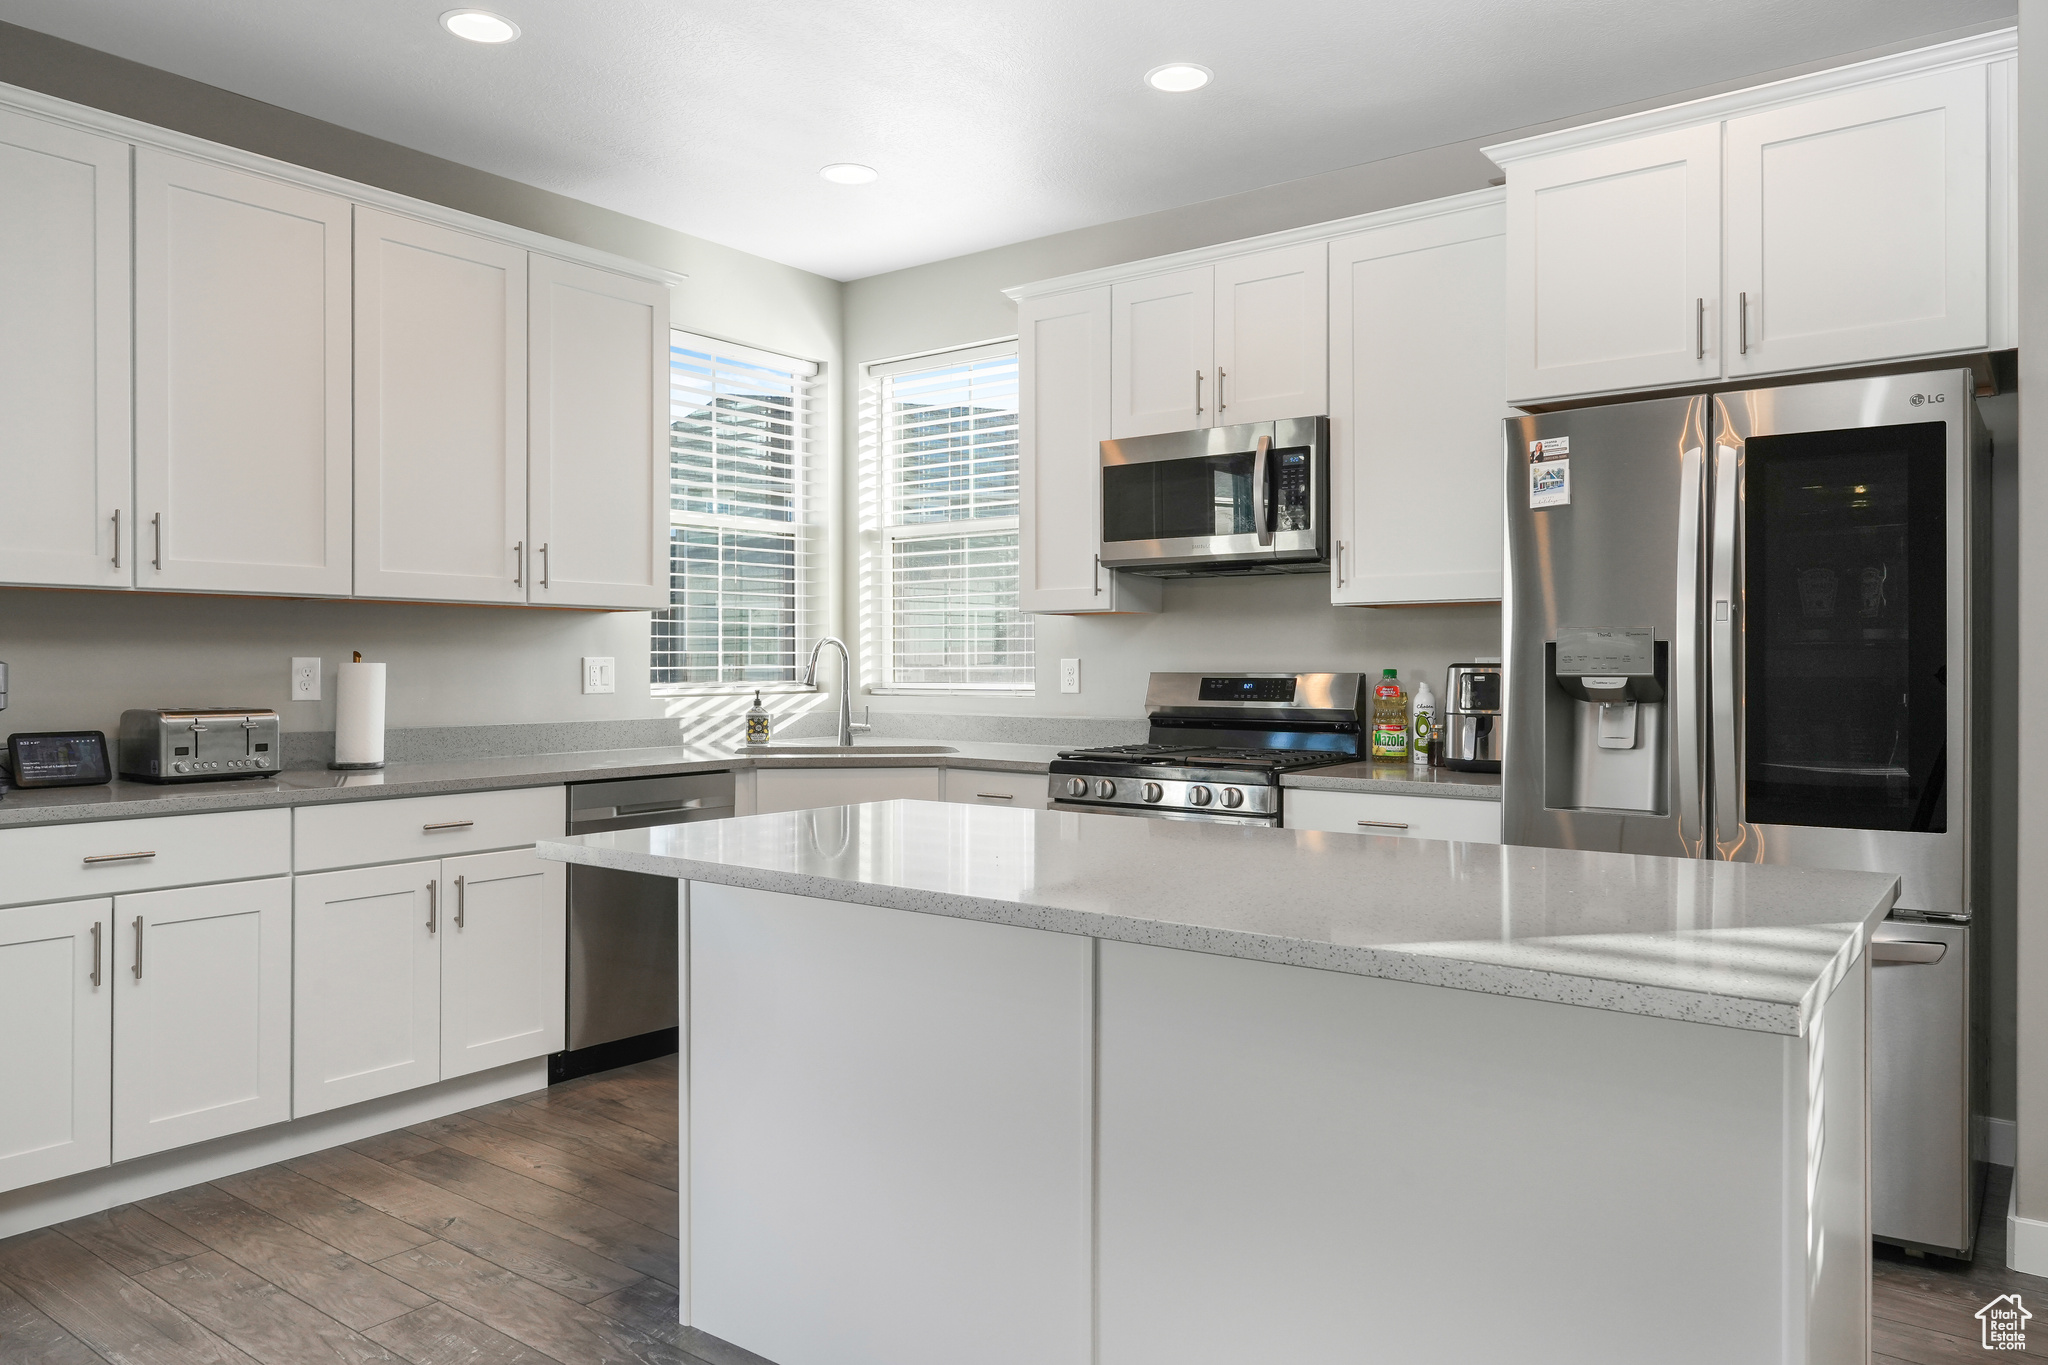 Kitchen with appliances with stainless steel finishes, a kitchen island, dark wood-type flooring, white cabinetry, and sink